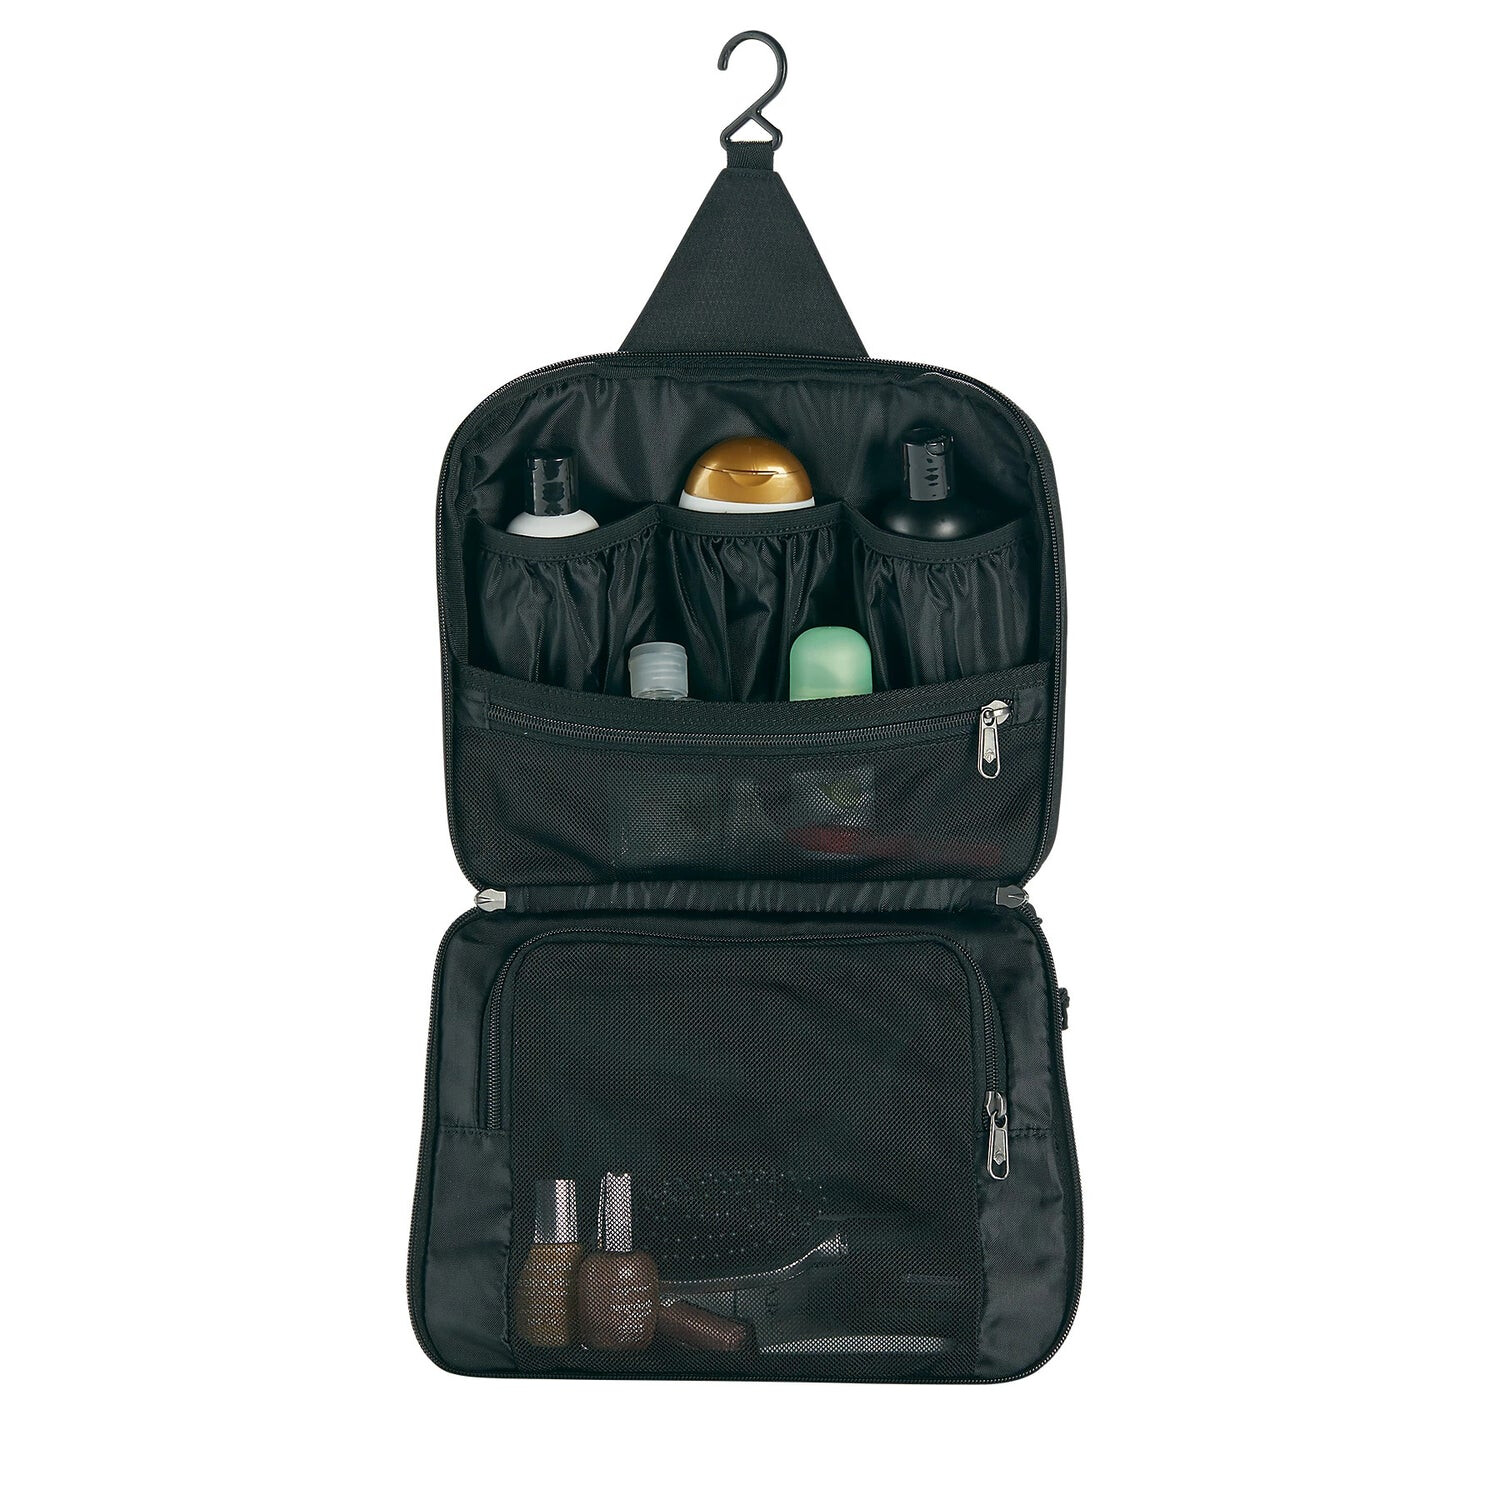 PACK-IT-REVEAL HANGING TOILETRY KIT